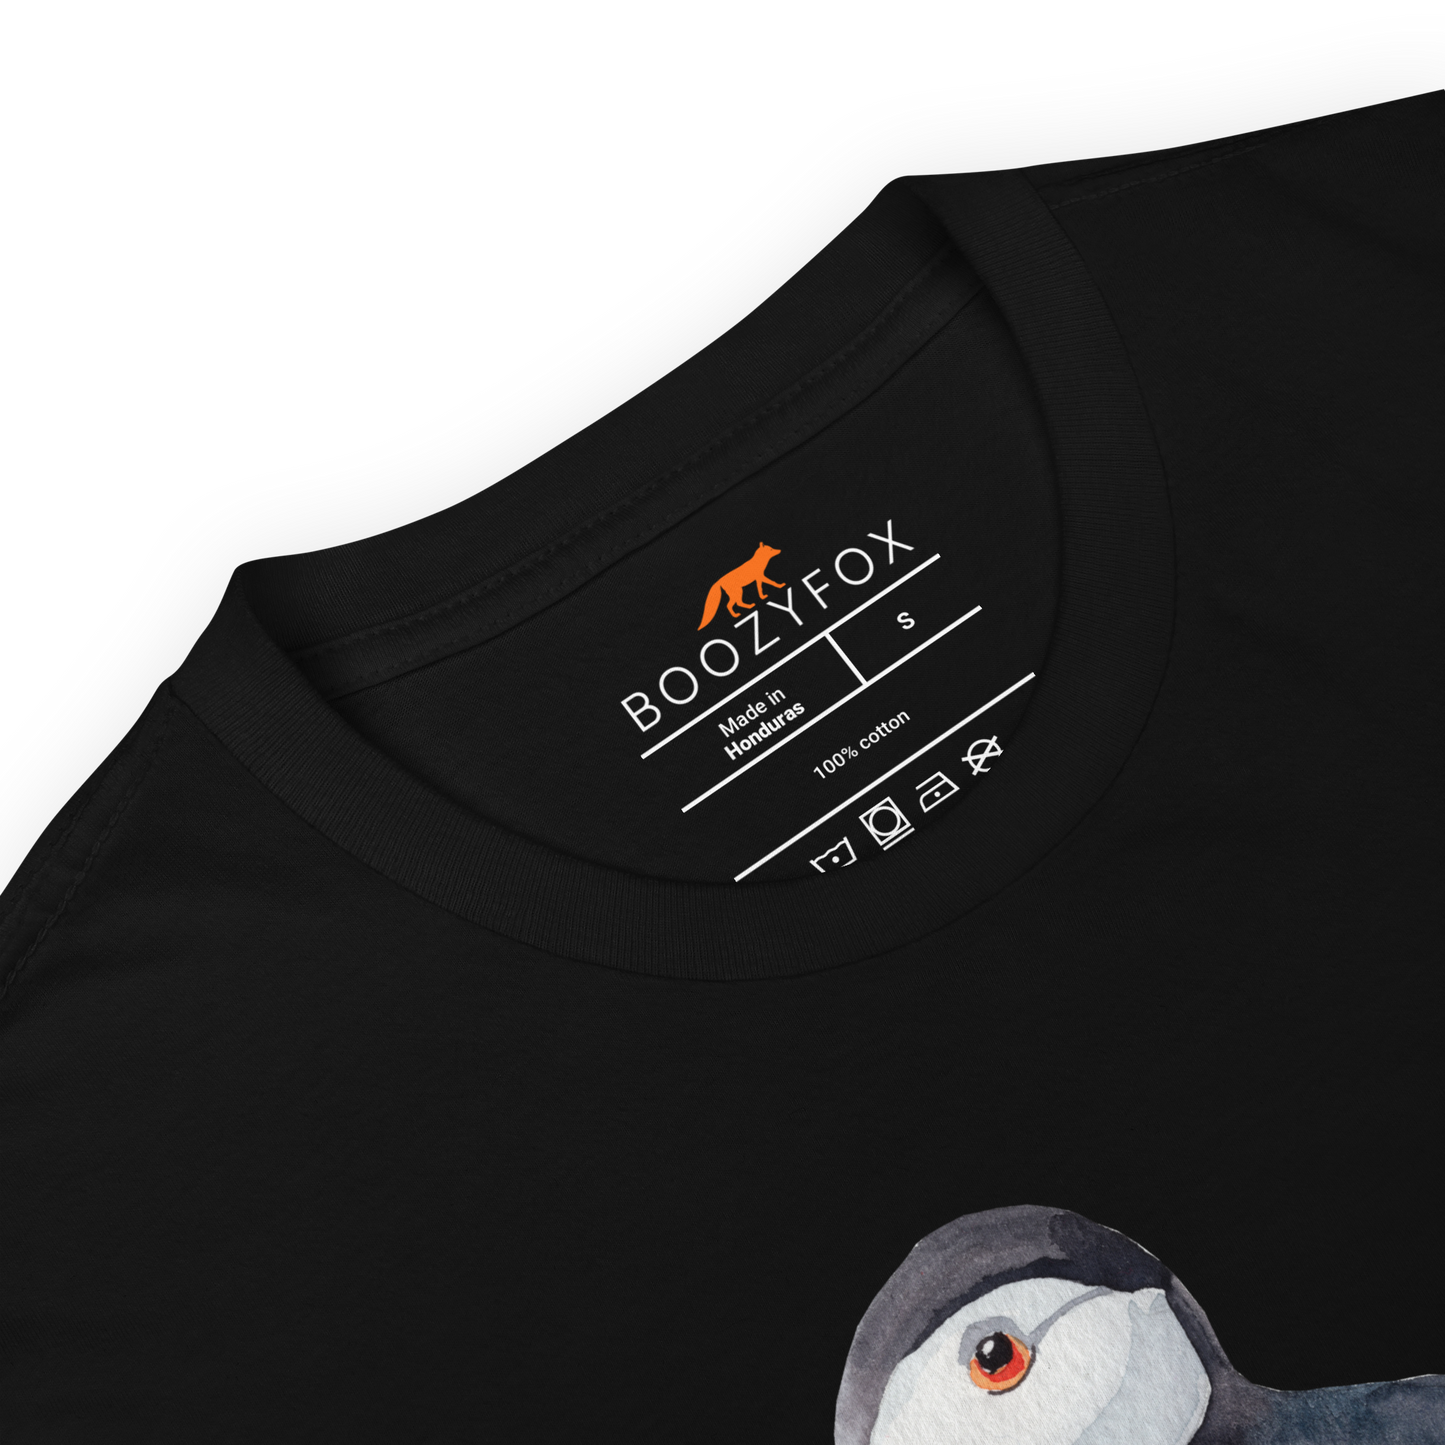 Product details of a Black Puffin T-Shirt featuring a comic Puuffin' graphic on the chest - Funny Graphic Puffin T-Shirts - Boozy Fox